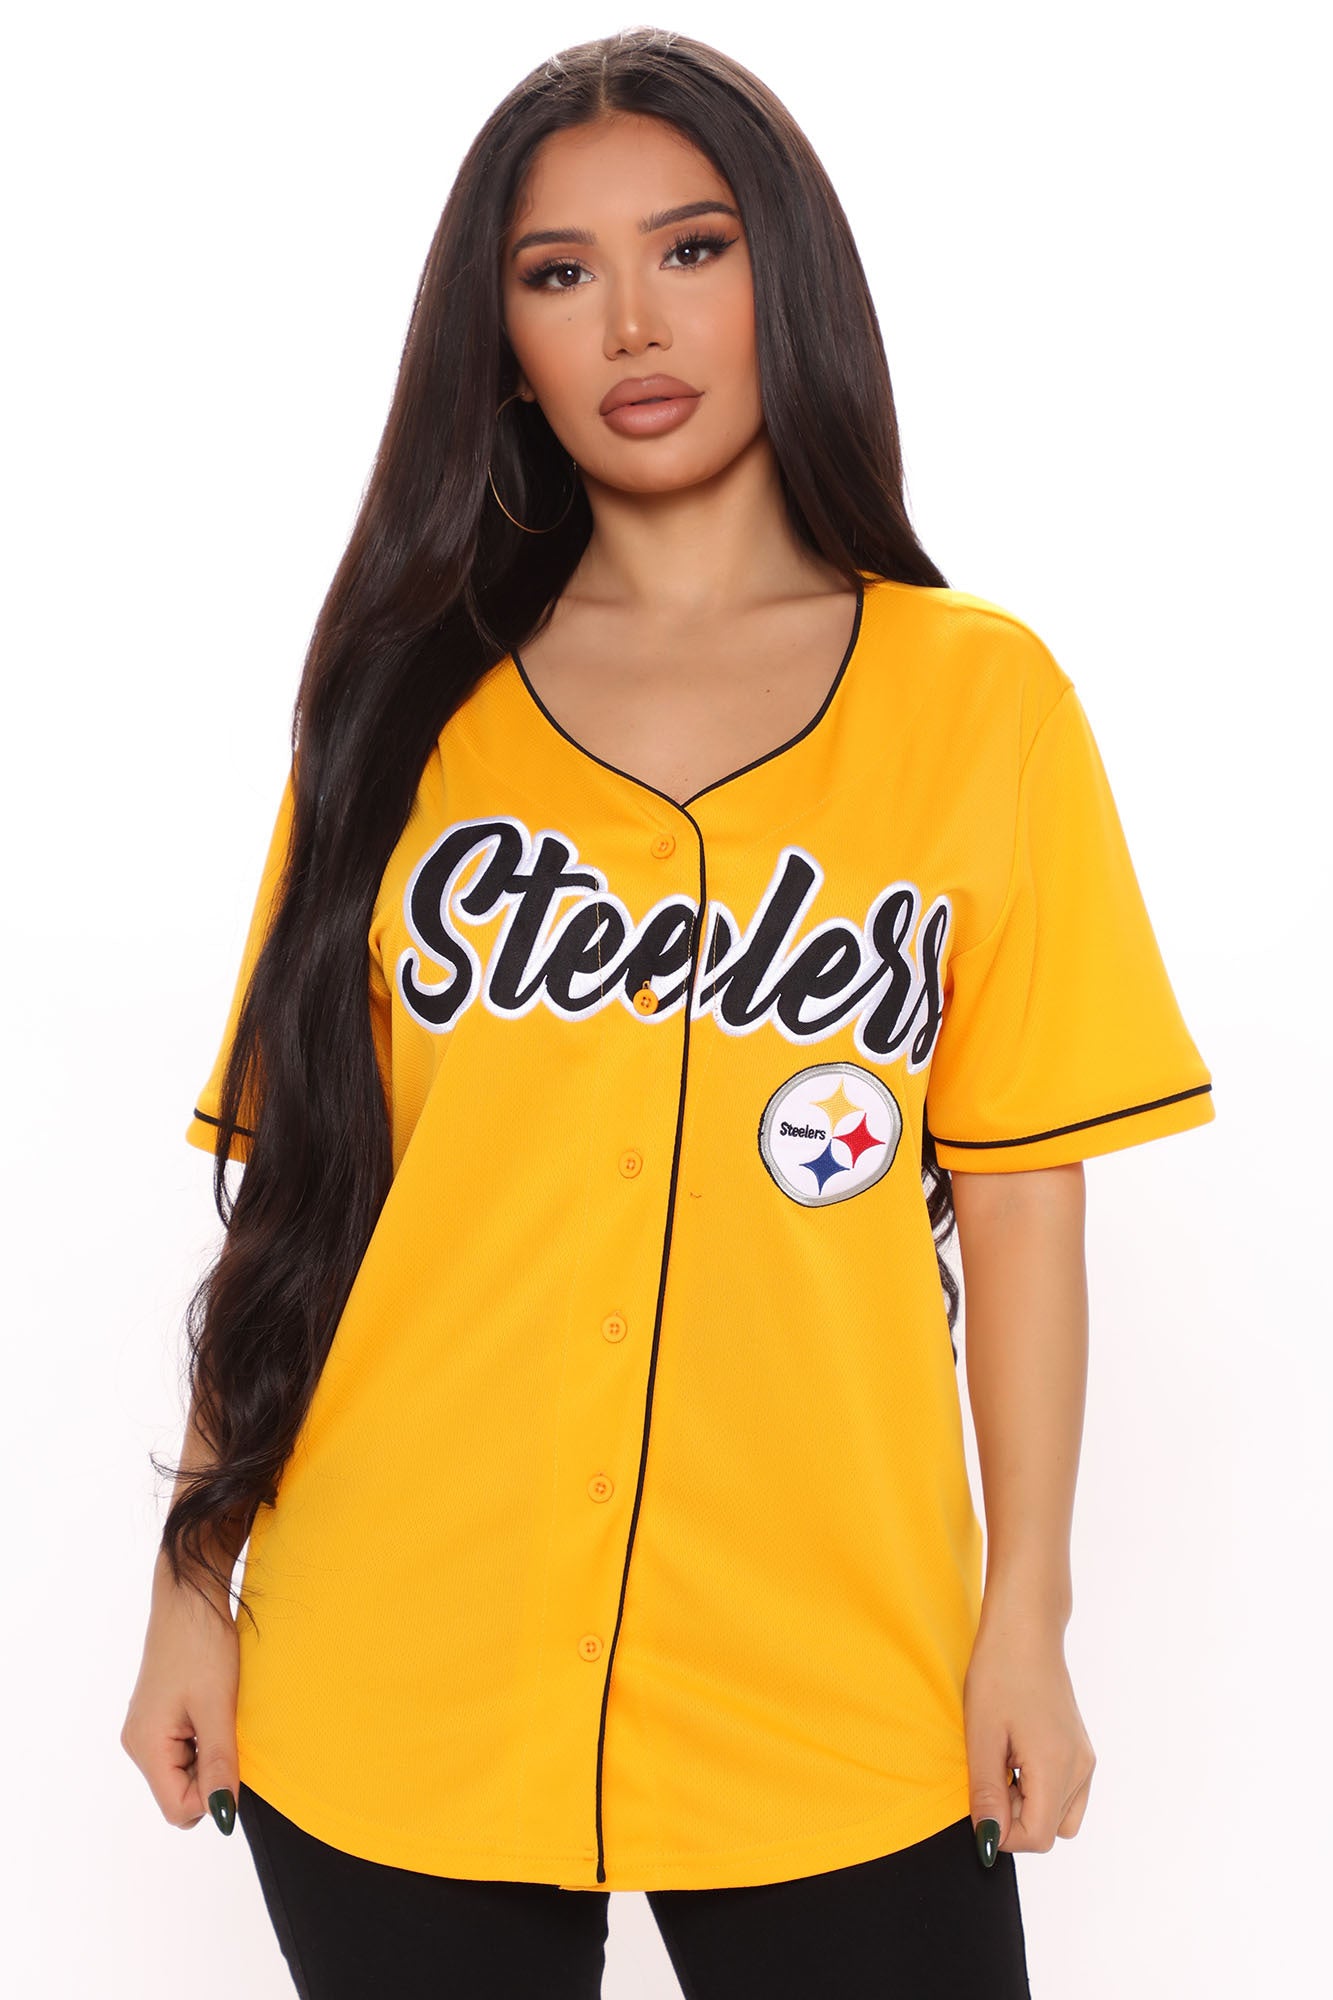 NFL End Zone Steelers Jersey - Yellow/combo, Fashion Nova, Screens Tops  and Bottoms